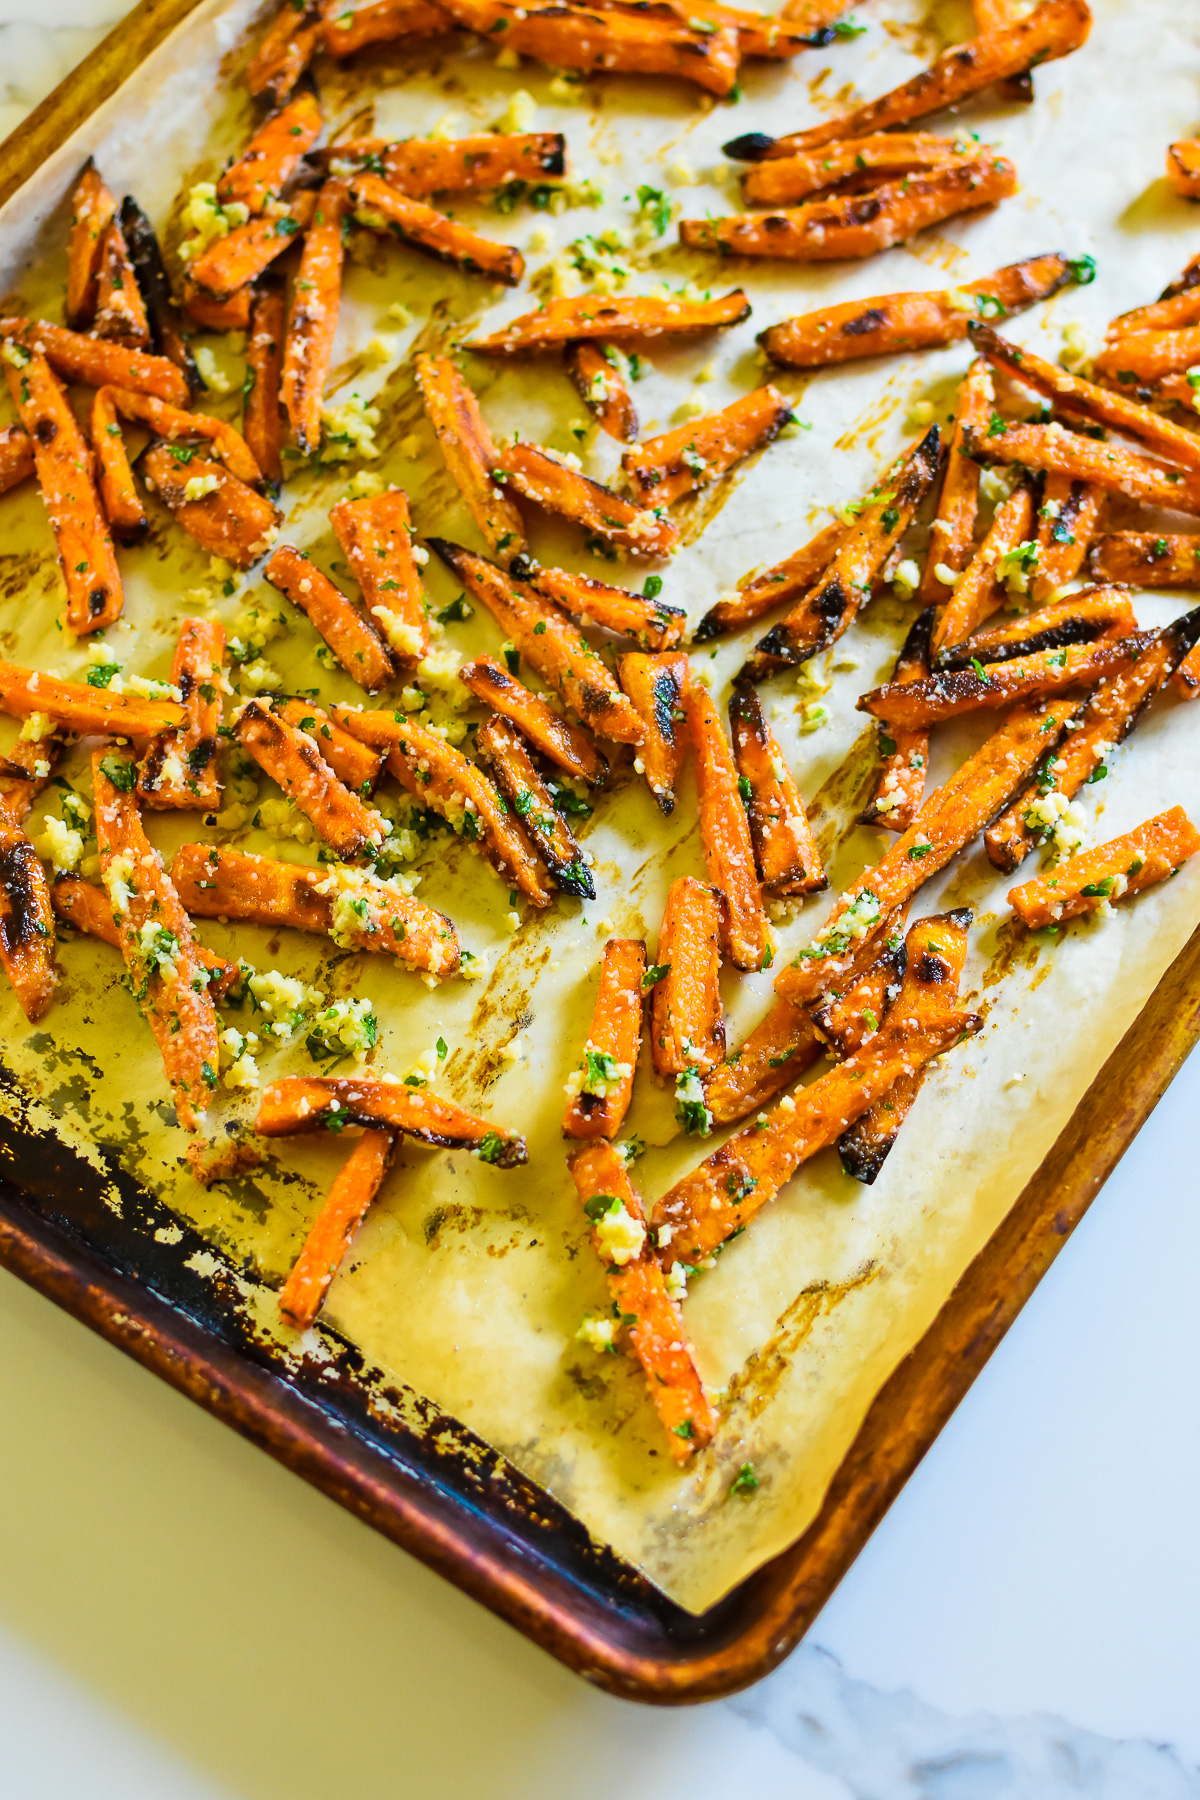 crispy homemade sweet potato fries on sheet pan tossed in garlic herb butter and parmesan cheese.